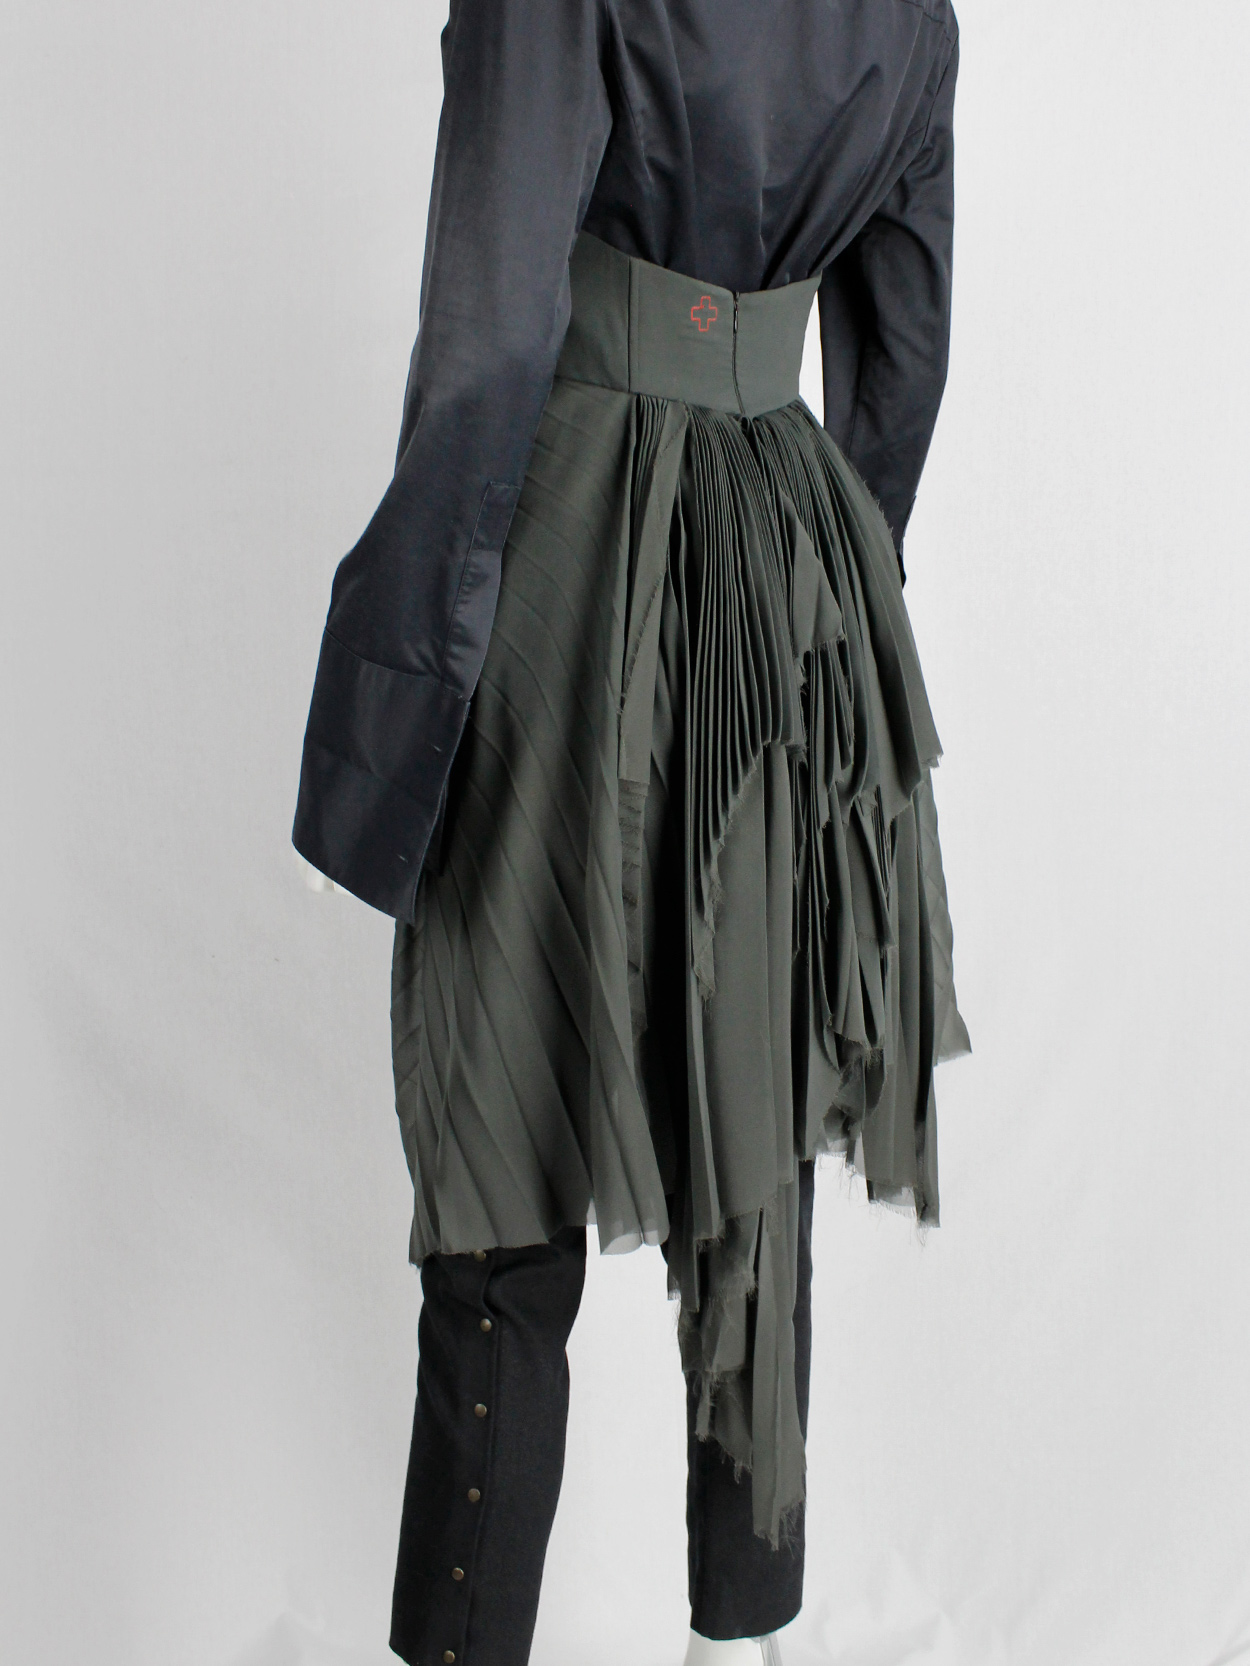 af Vandevorst forest green pleated bustier with layered pleated skirt fall 2011 (19)